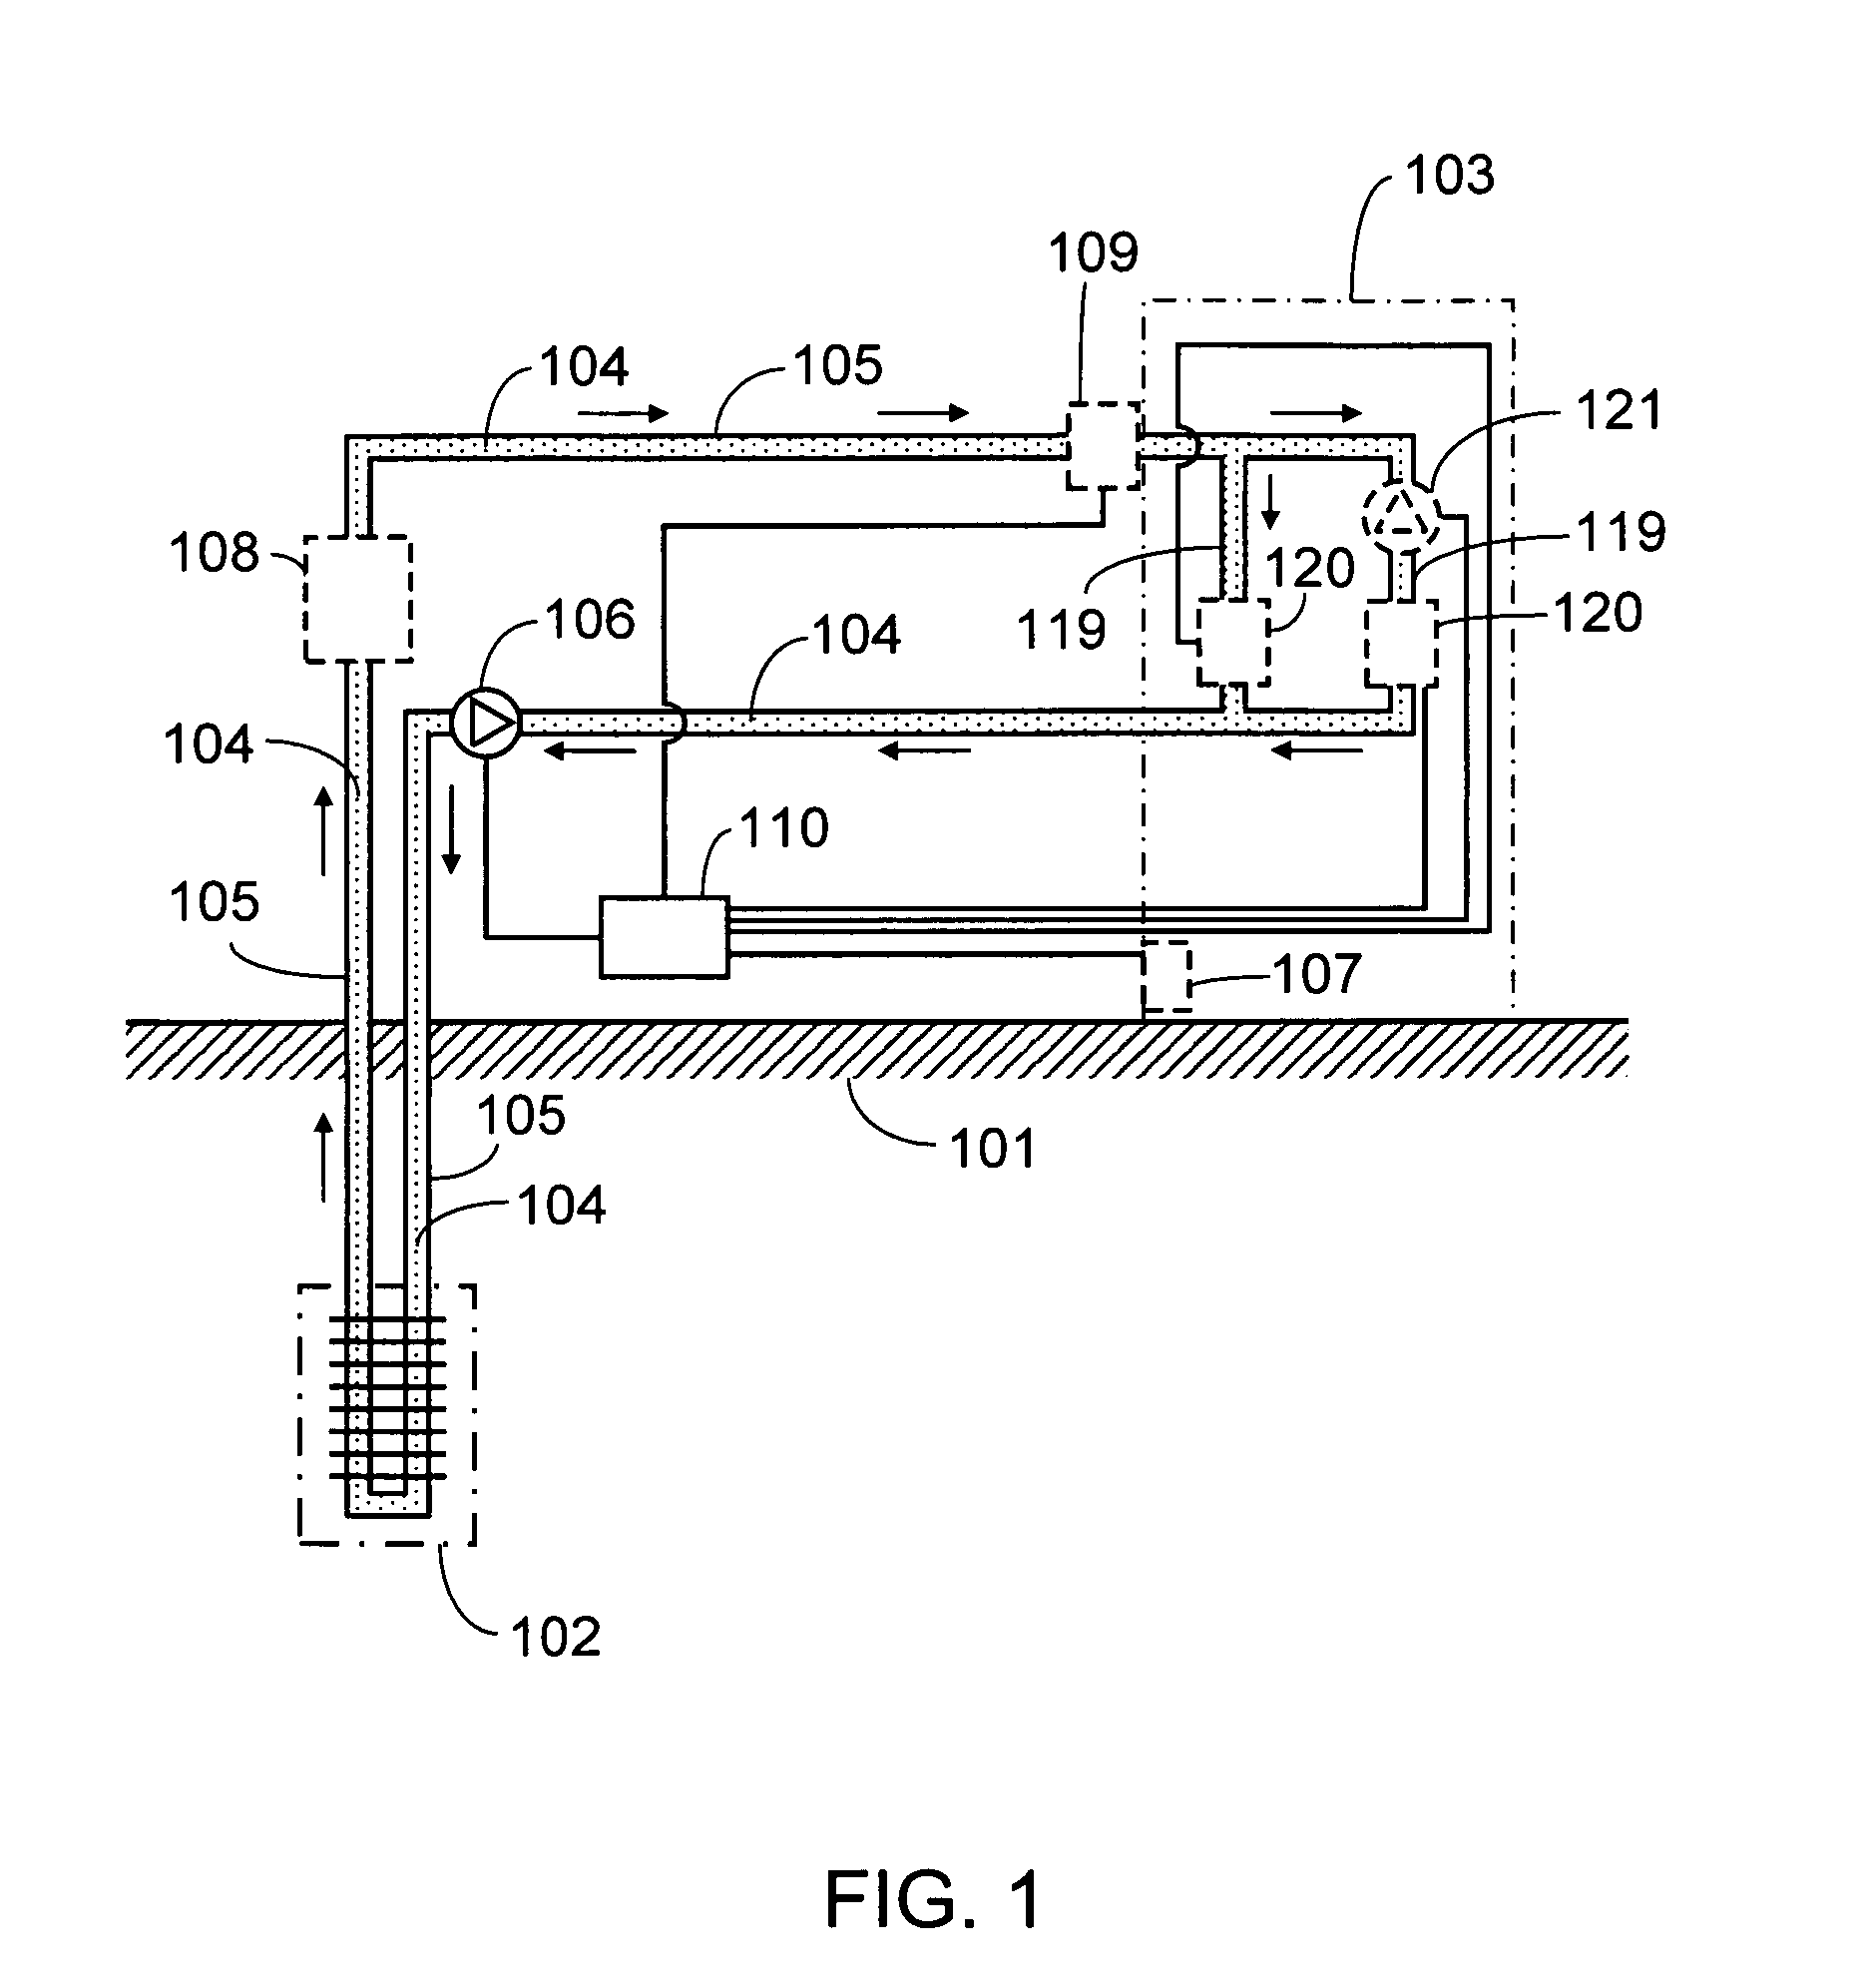 Semiconductor application installation adapted with a temperature equalization system